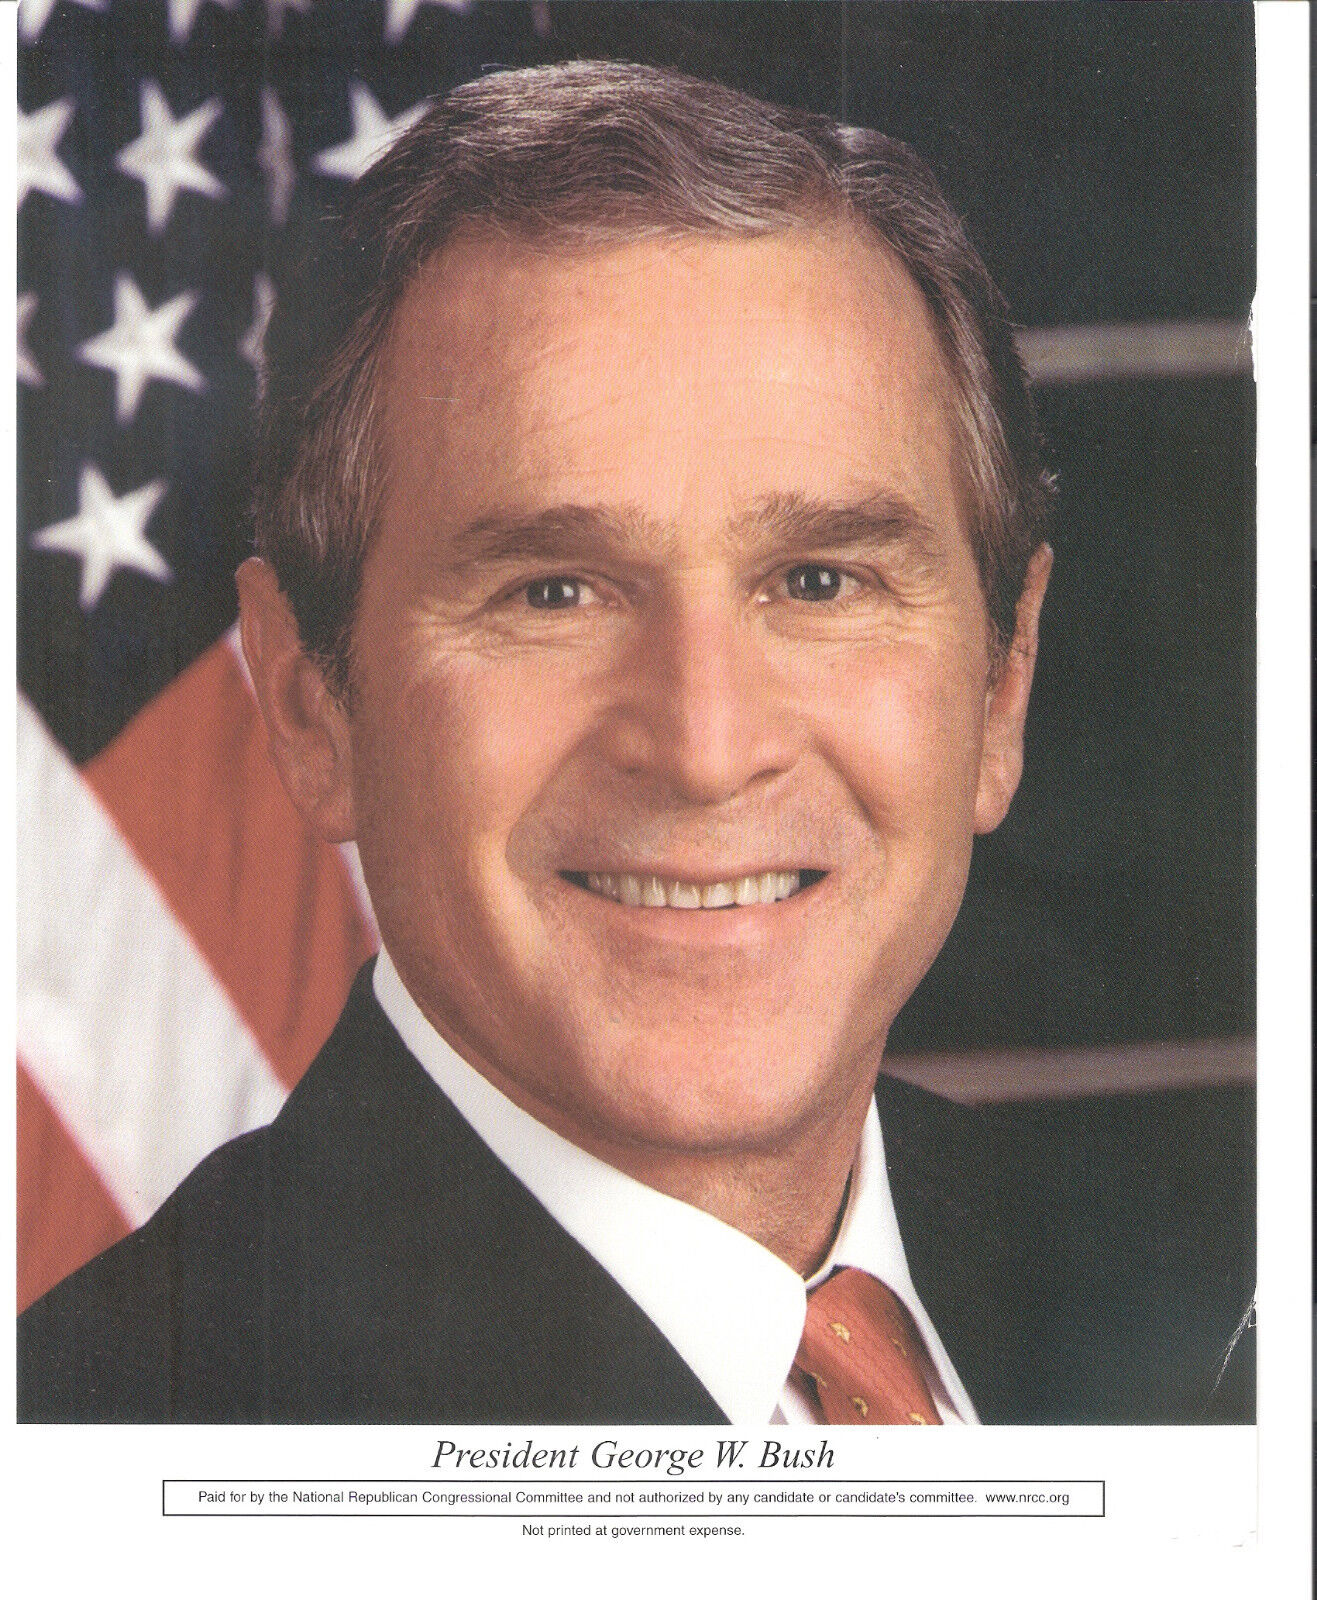 President George W. Bush 8x10 Color Photo with American Flag in Background